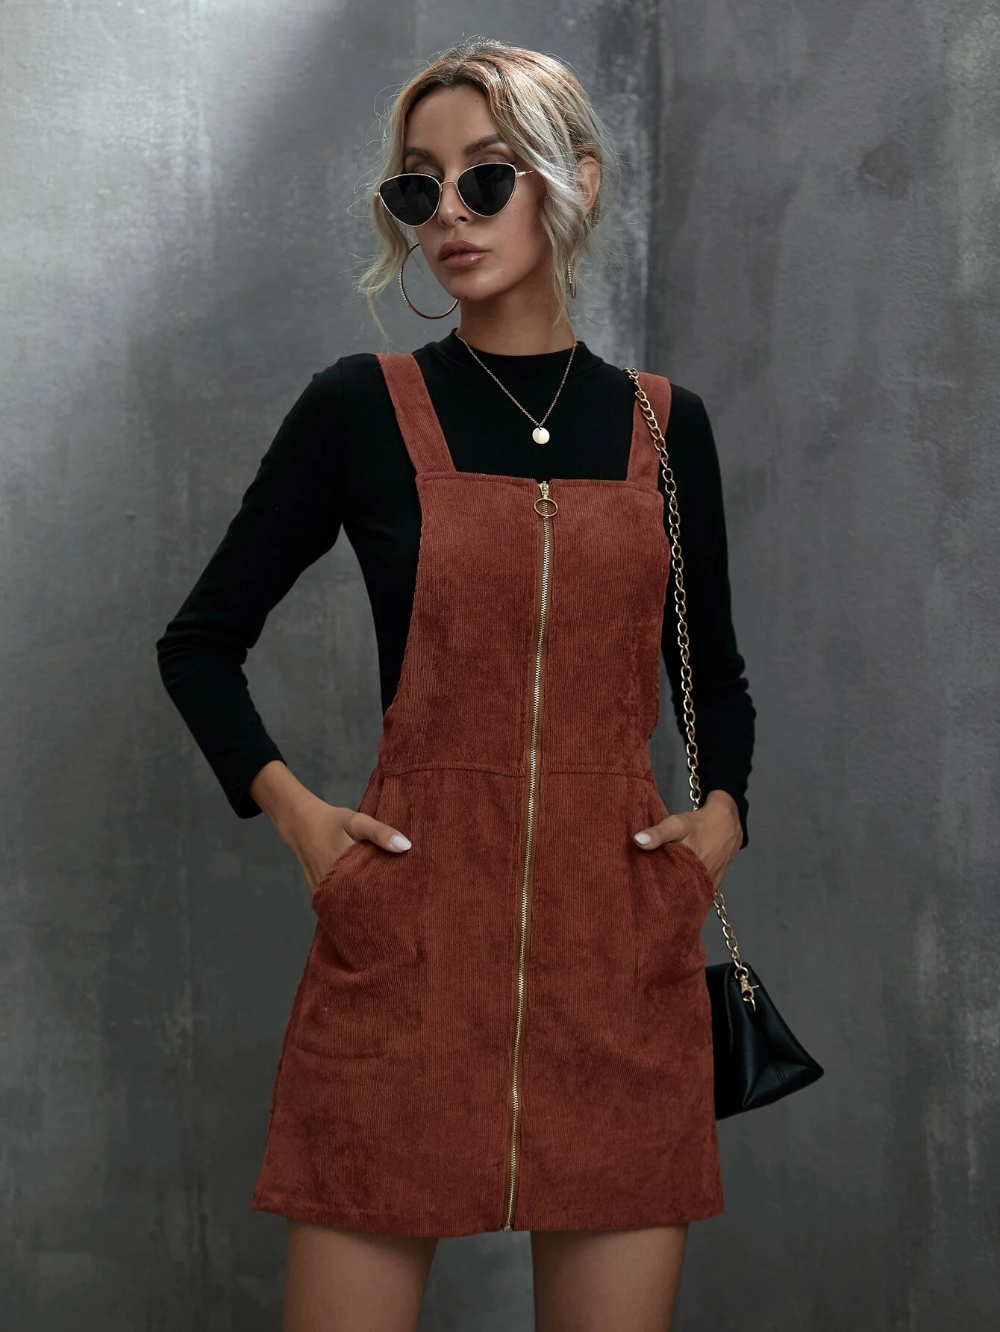 Top 13 Corduroy Dress Outfit Ideas: How to Style Casually & Attractively